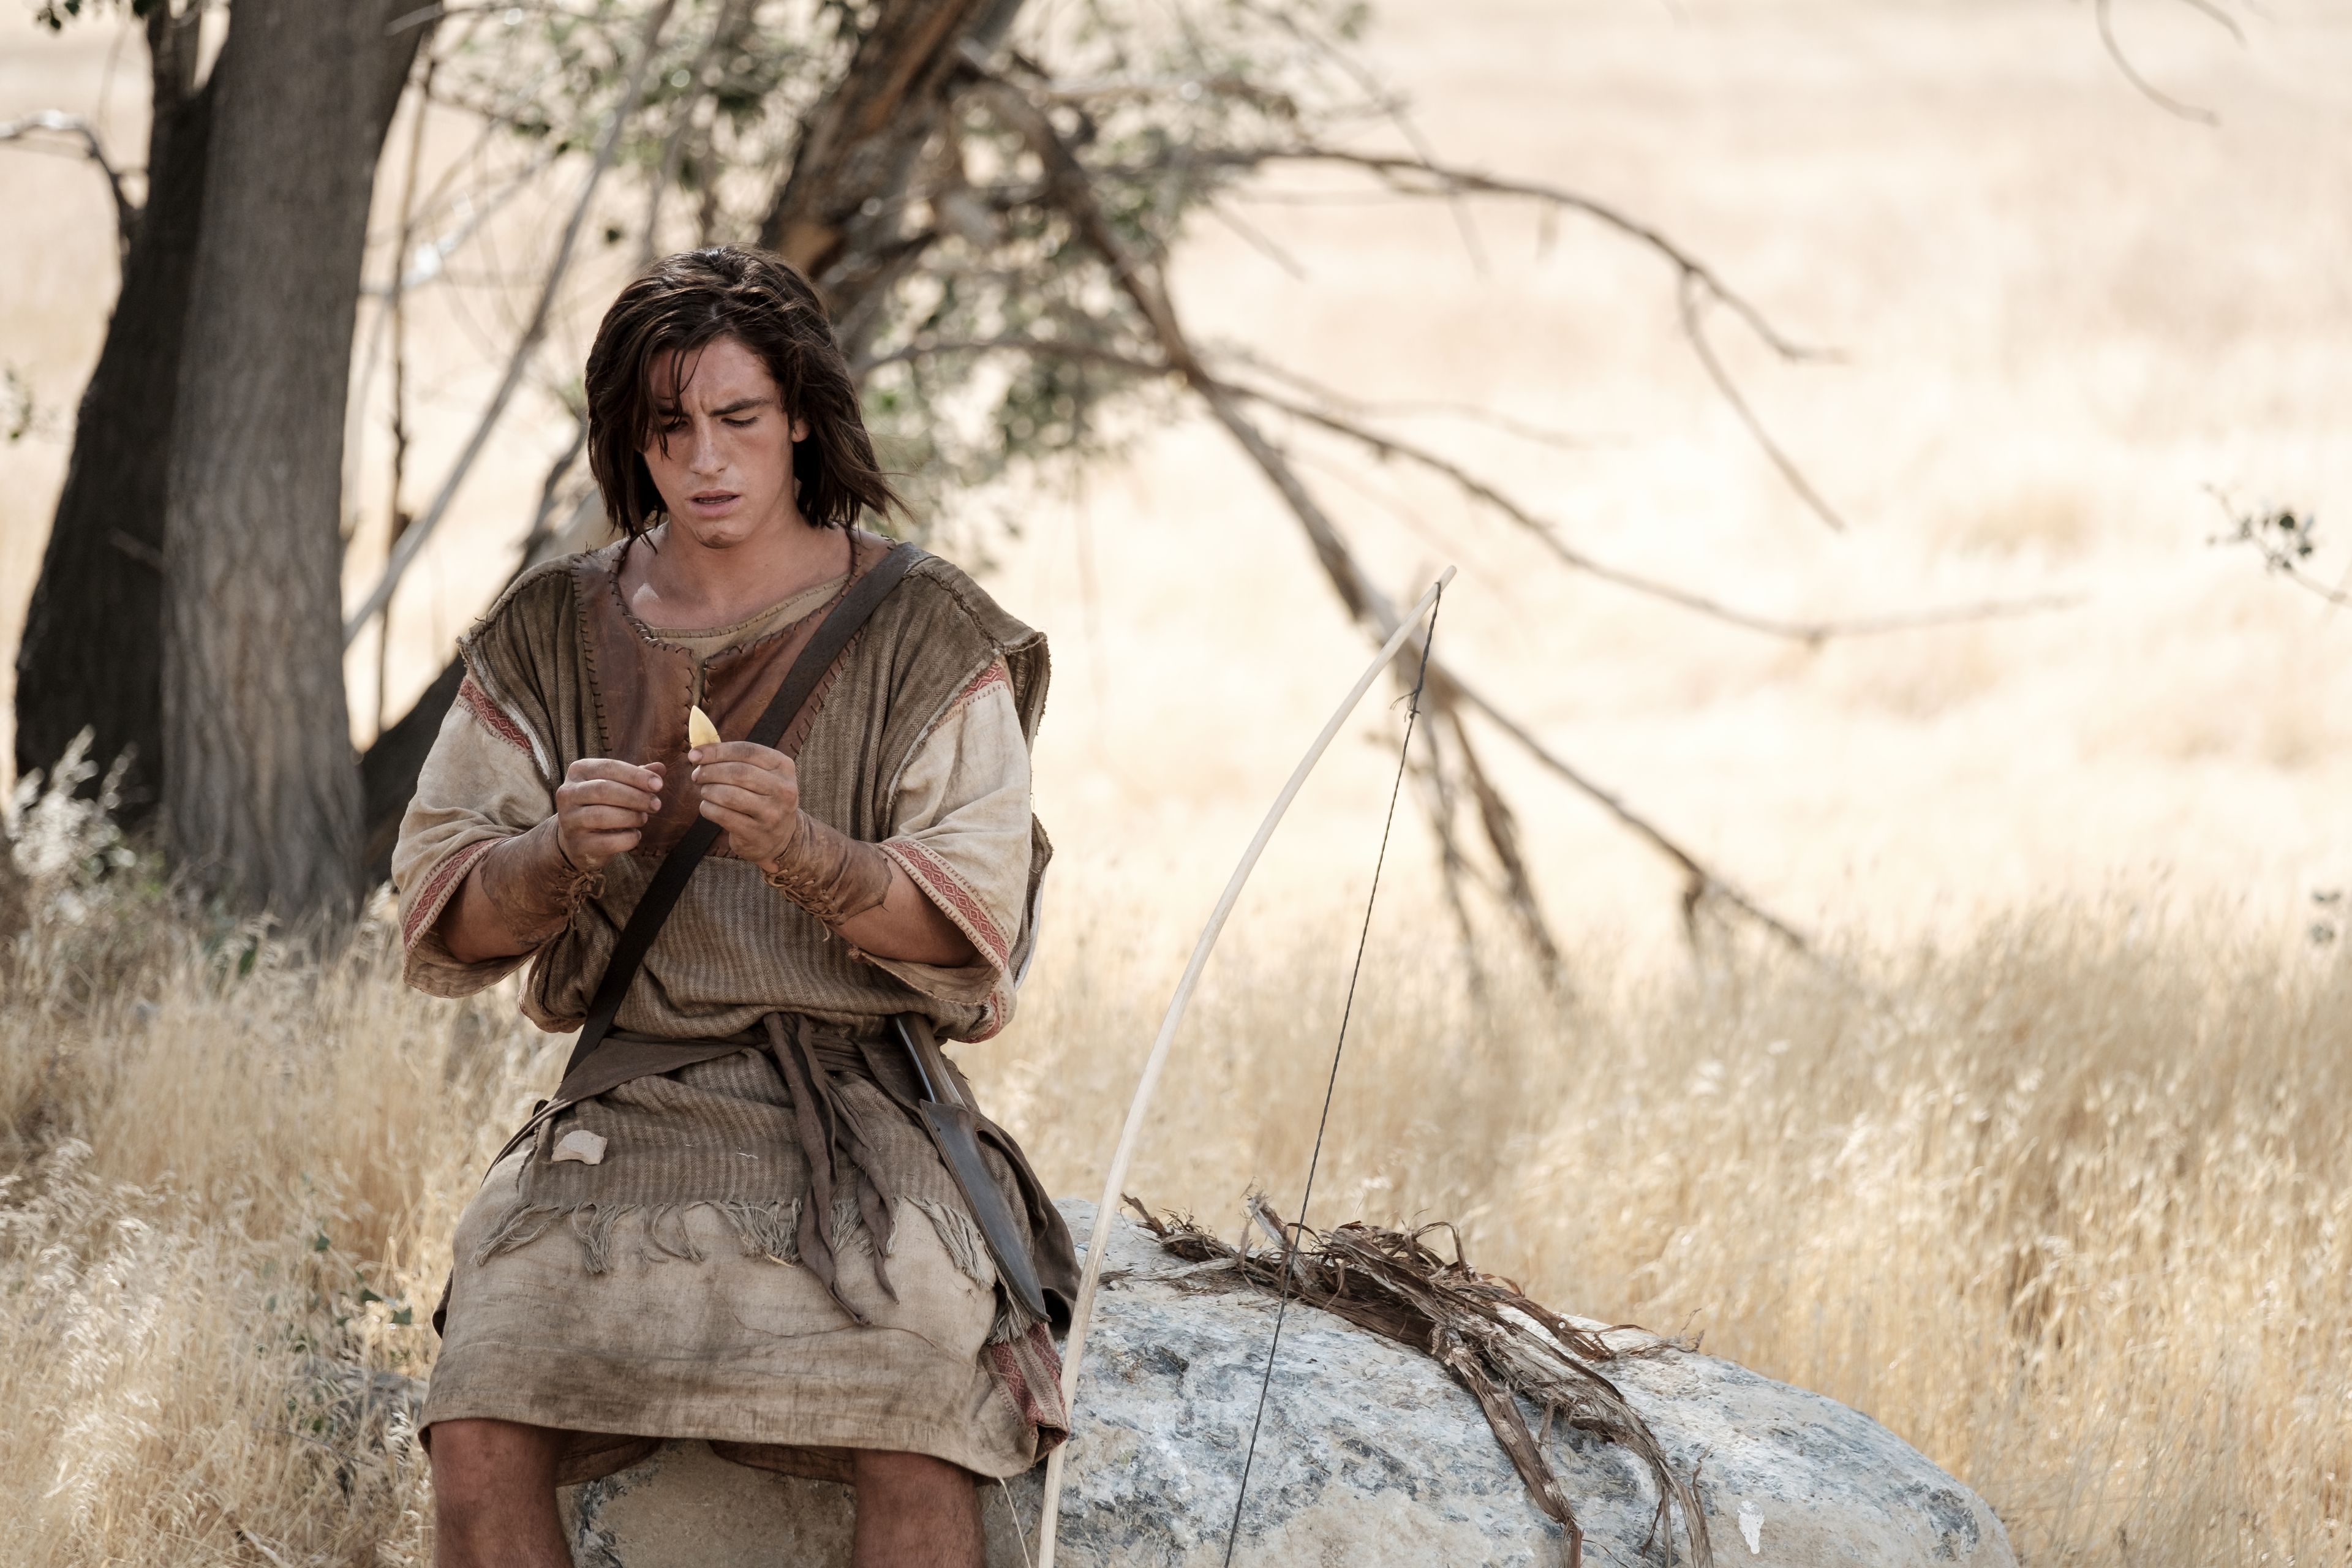 Nephi makes a new bow and an arrow in the wilderness.